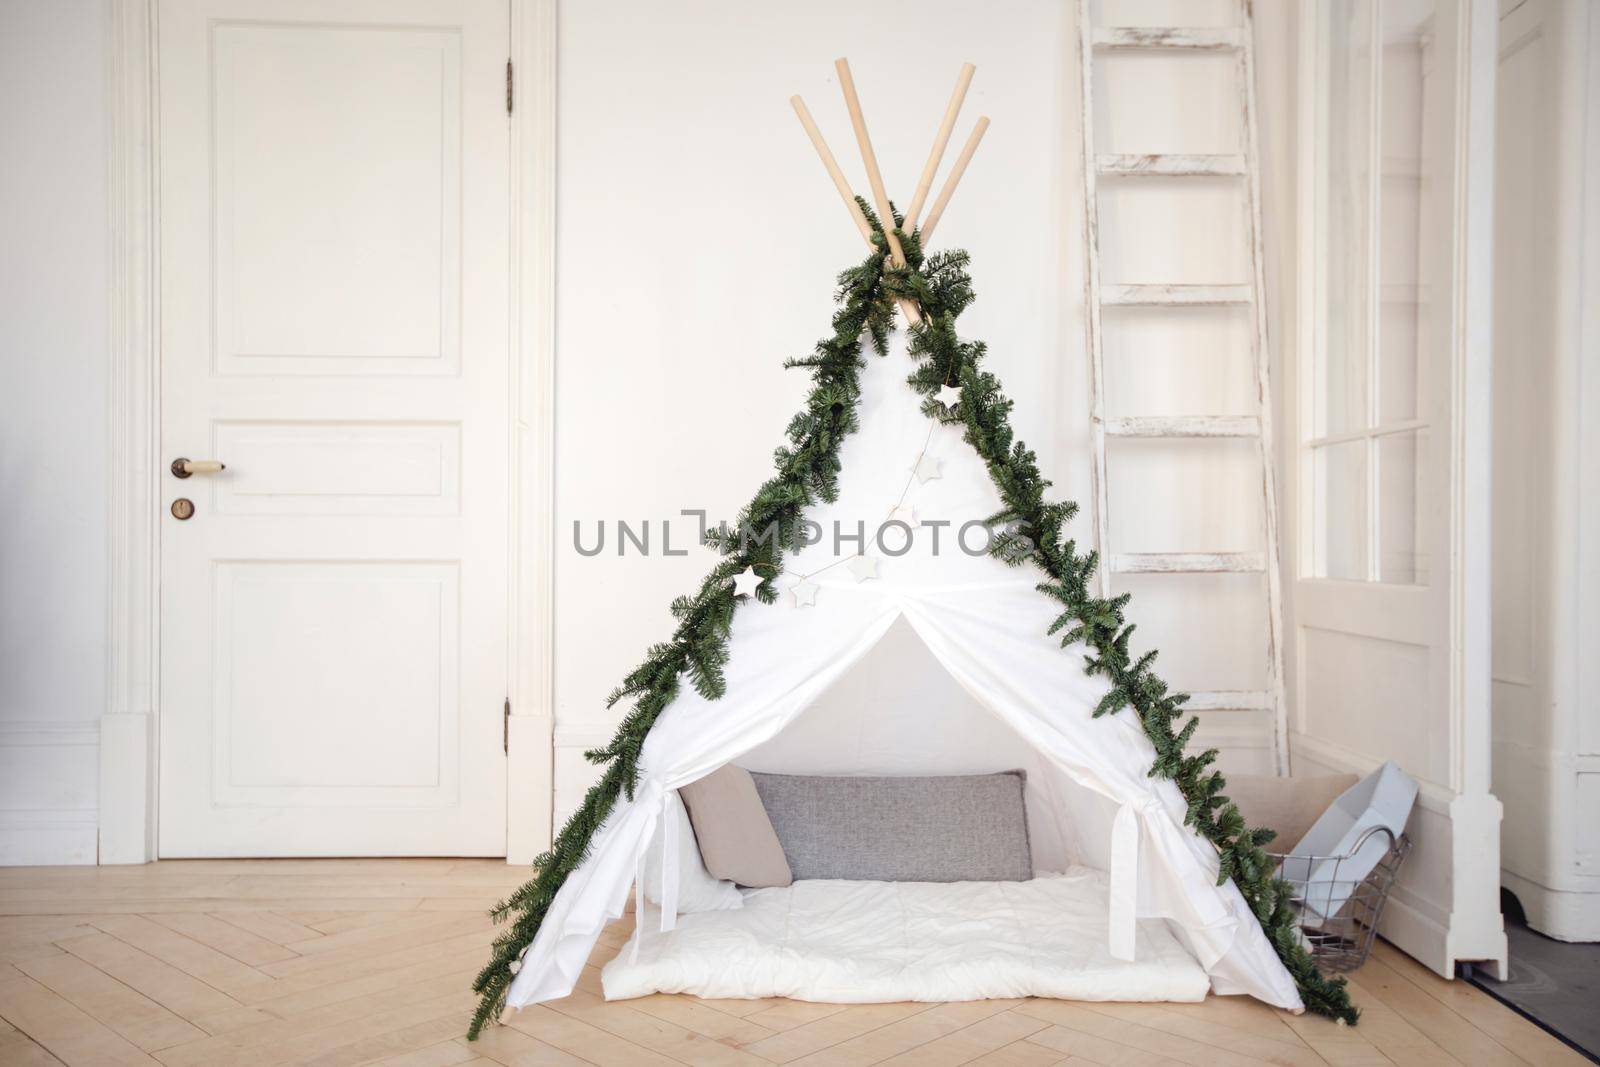 Beautiful comfortable tent with pillows inside created at home and decorated with pine branches.